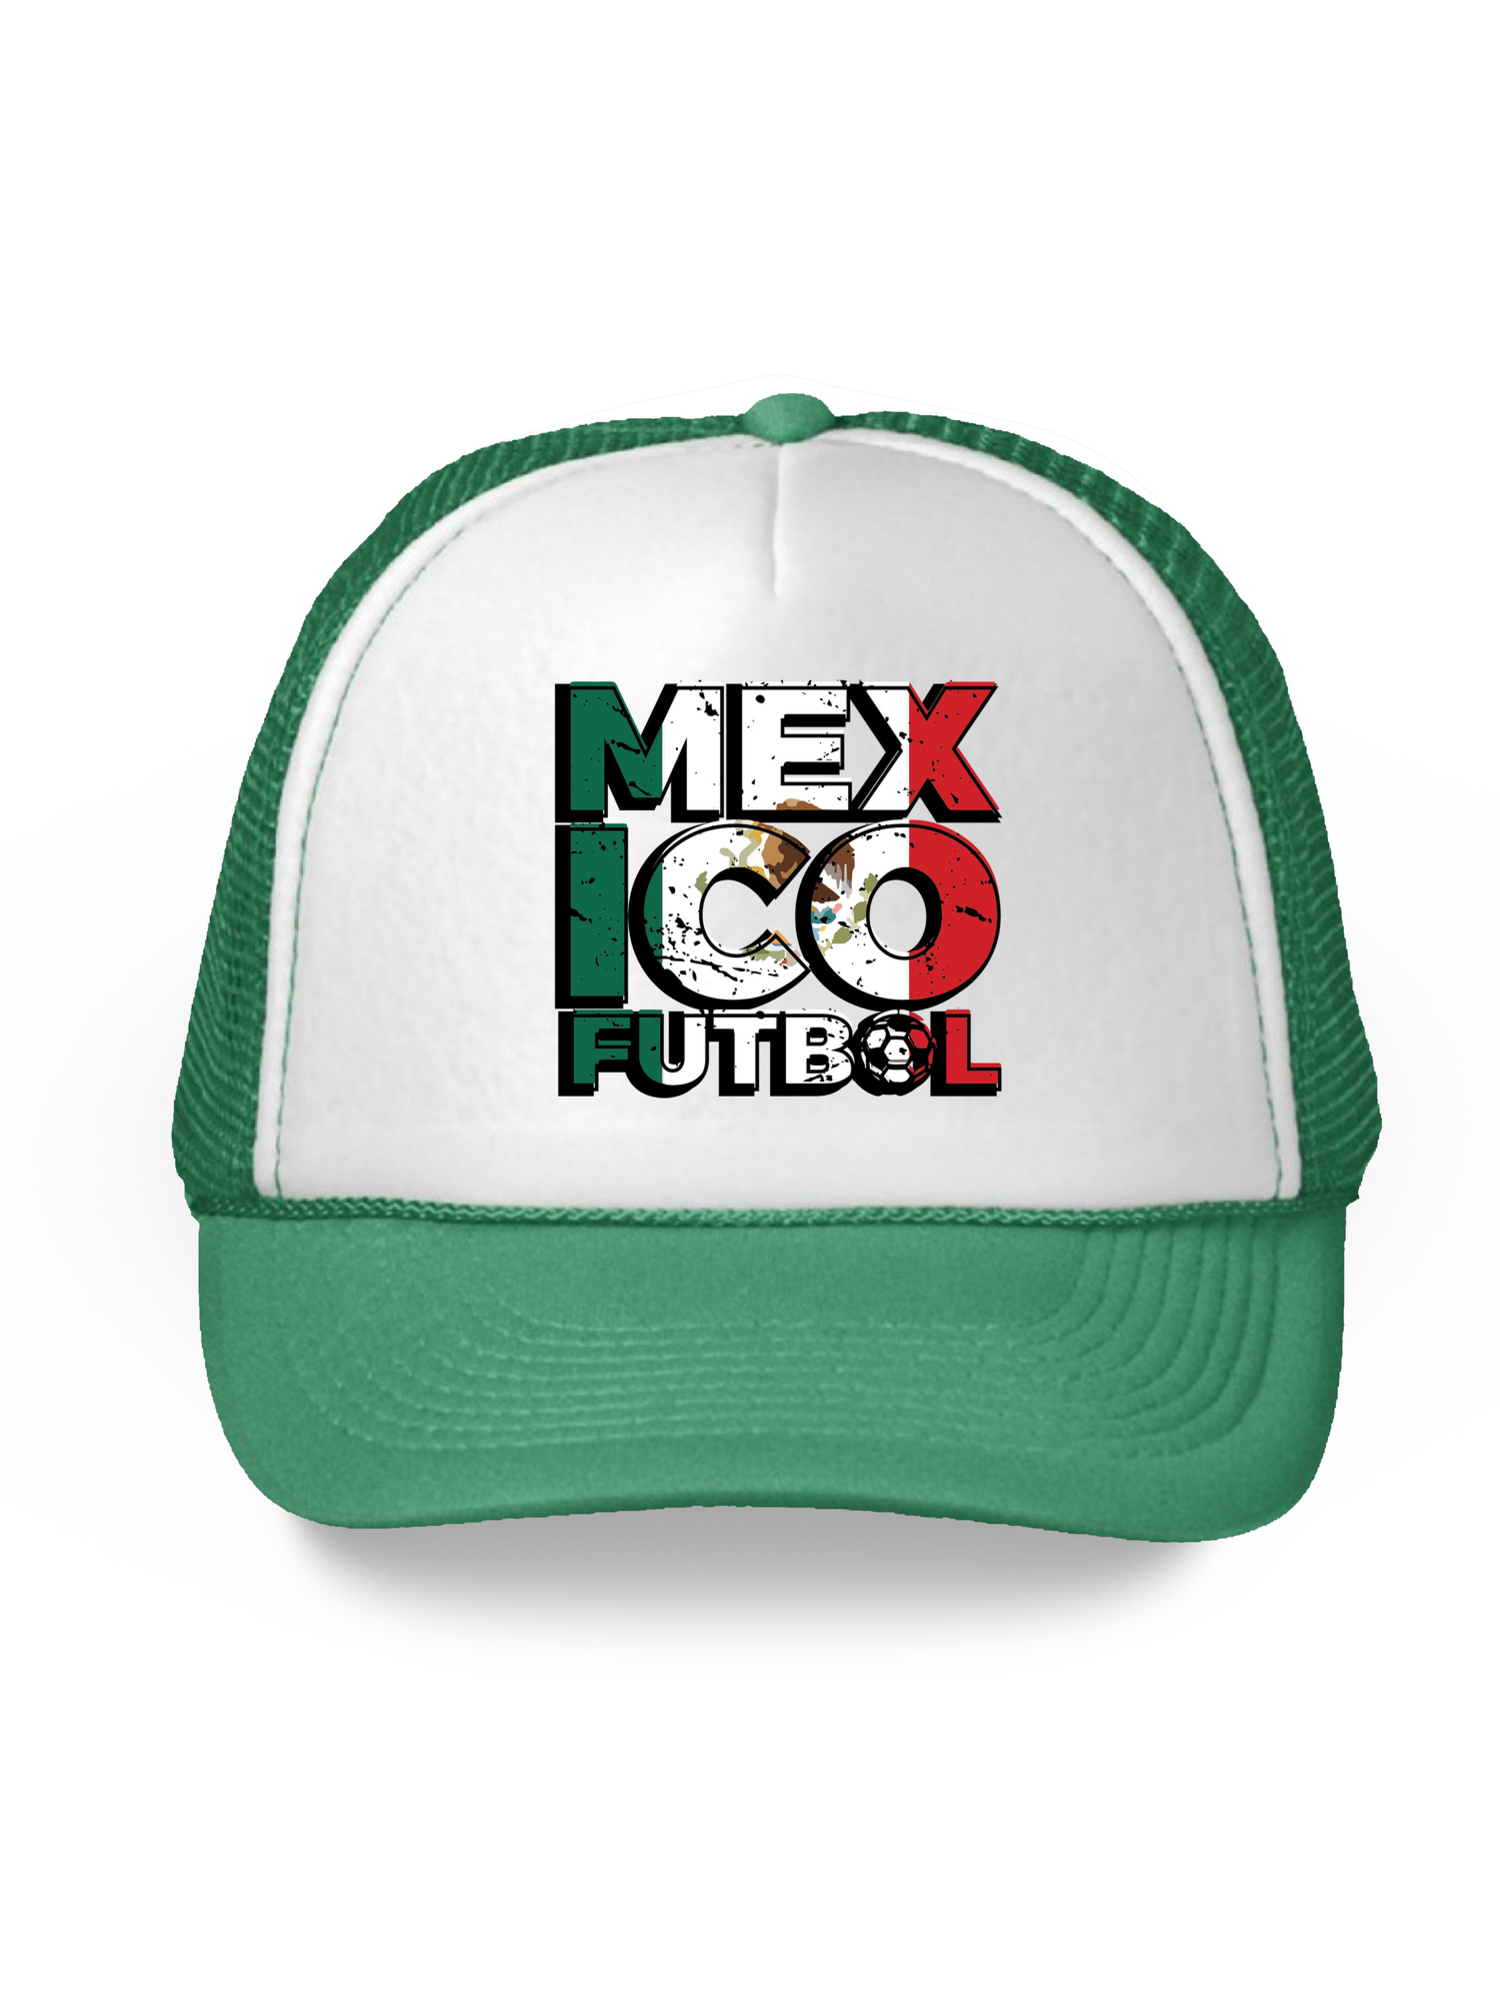 Awkward Styles Mexico Futbol Hat Mexico Trucker Hats for Men and Women Hat Gifts from Mexico Mexican Soccer Cap Mexican Hats Unisex Mexico Snapback Hat Mexico 2018 Trucker Hats Mexico Football Hat - image 1 of 6